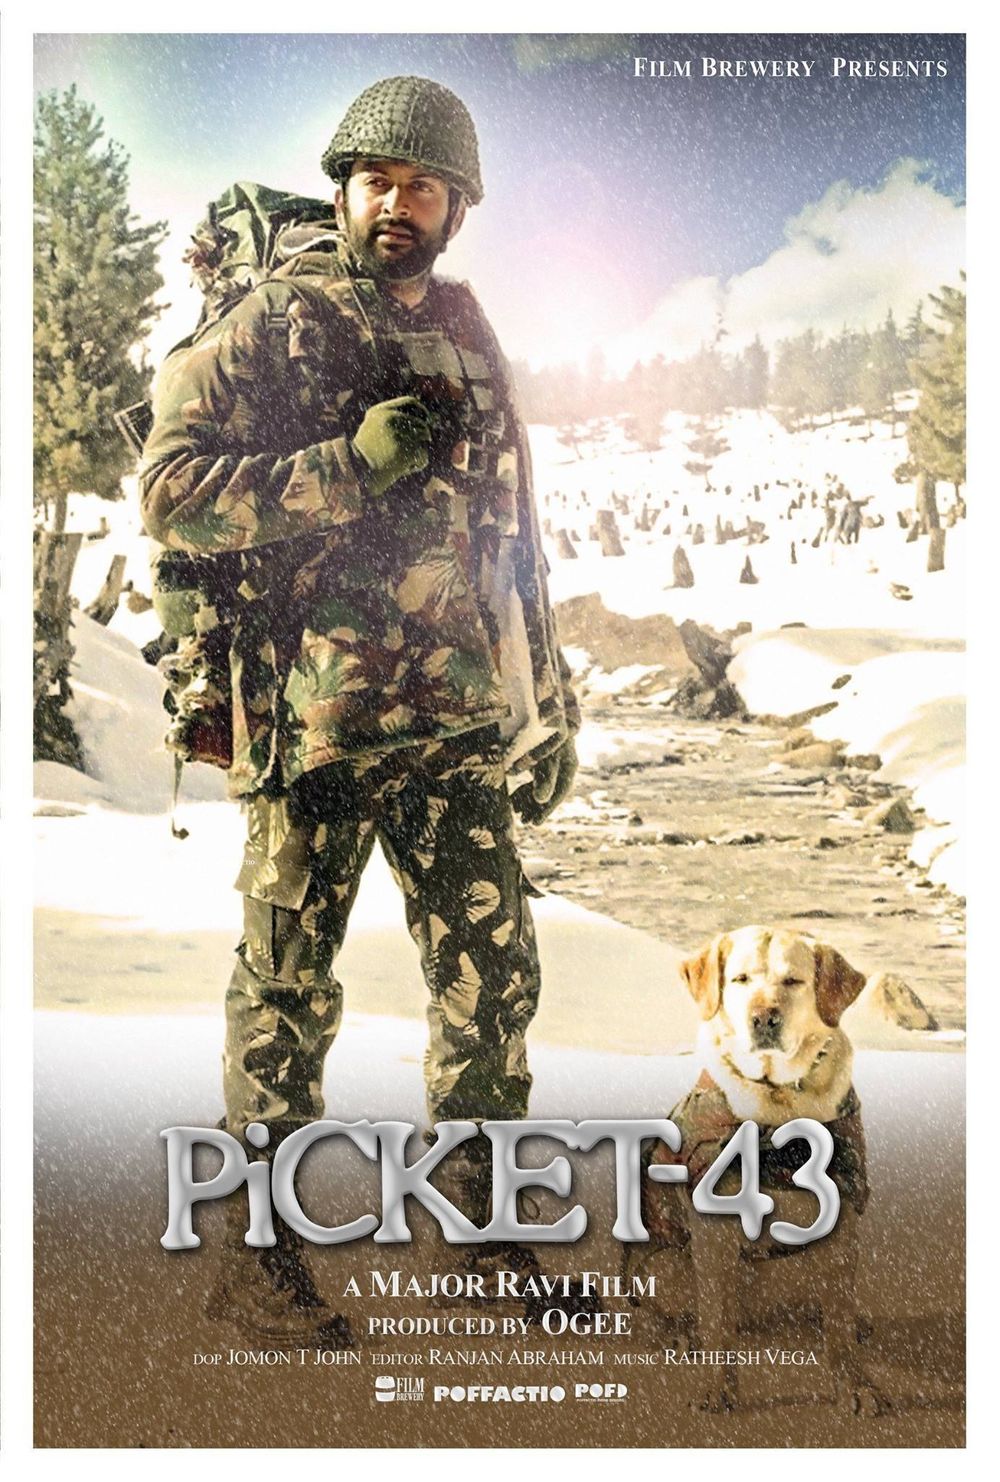 Picket - 43 Movie Review